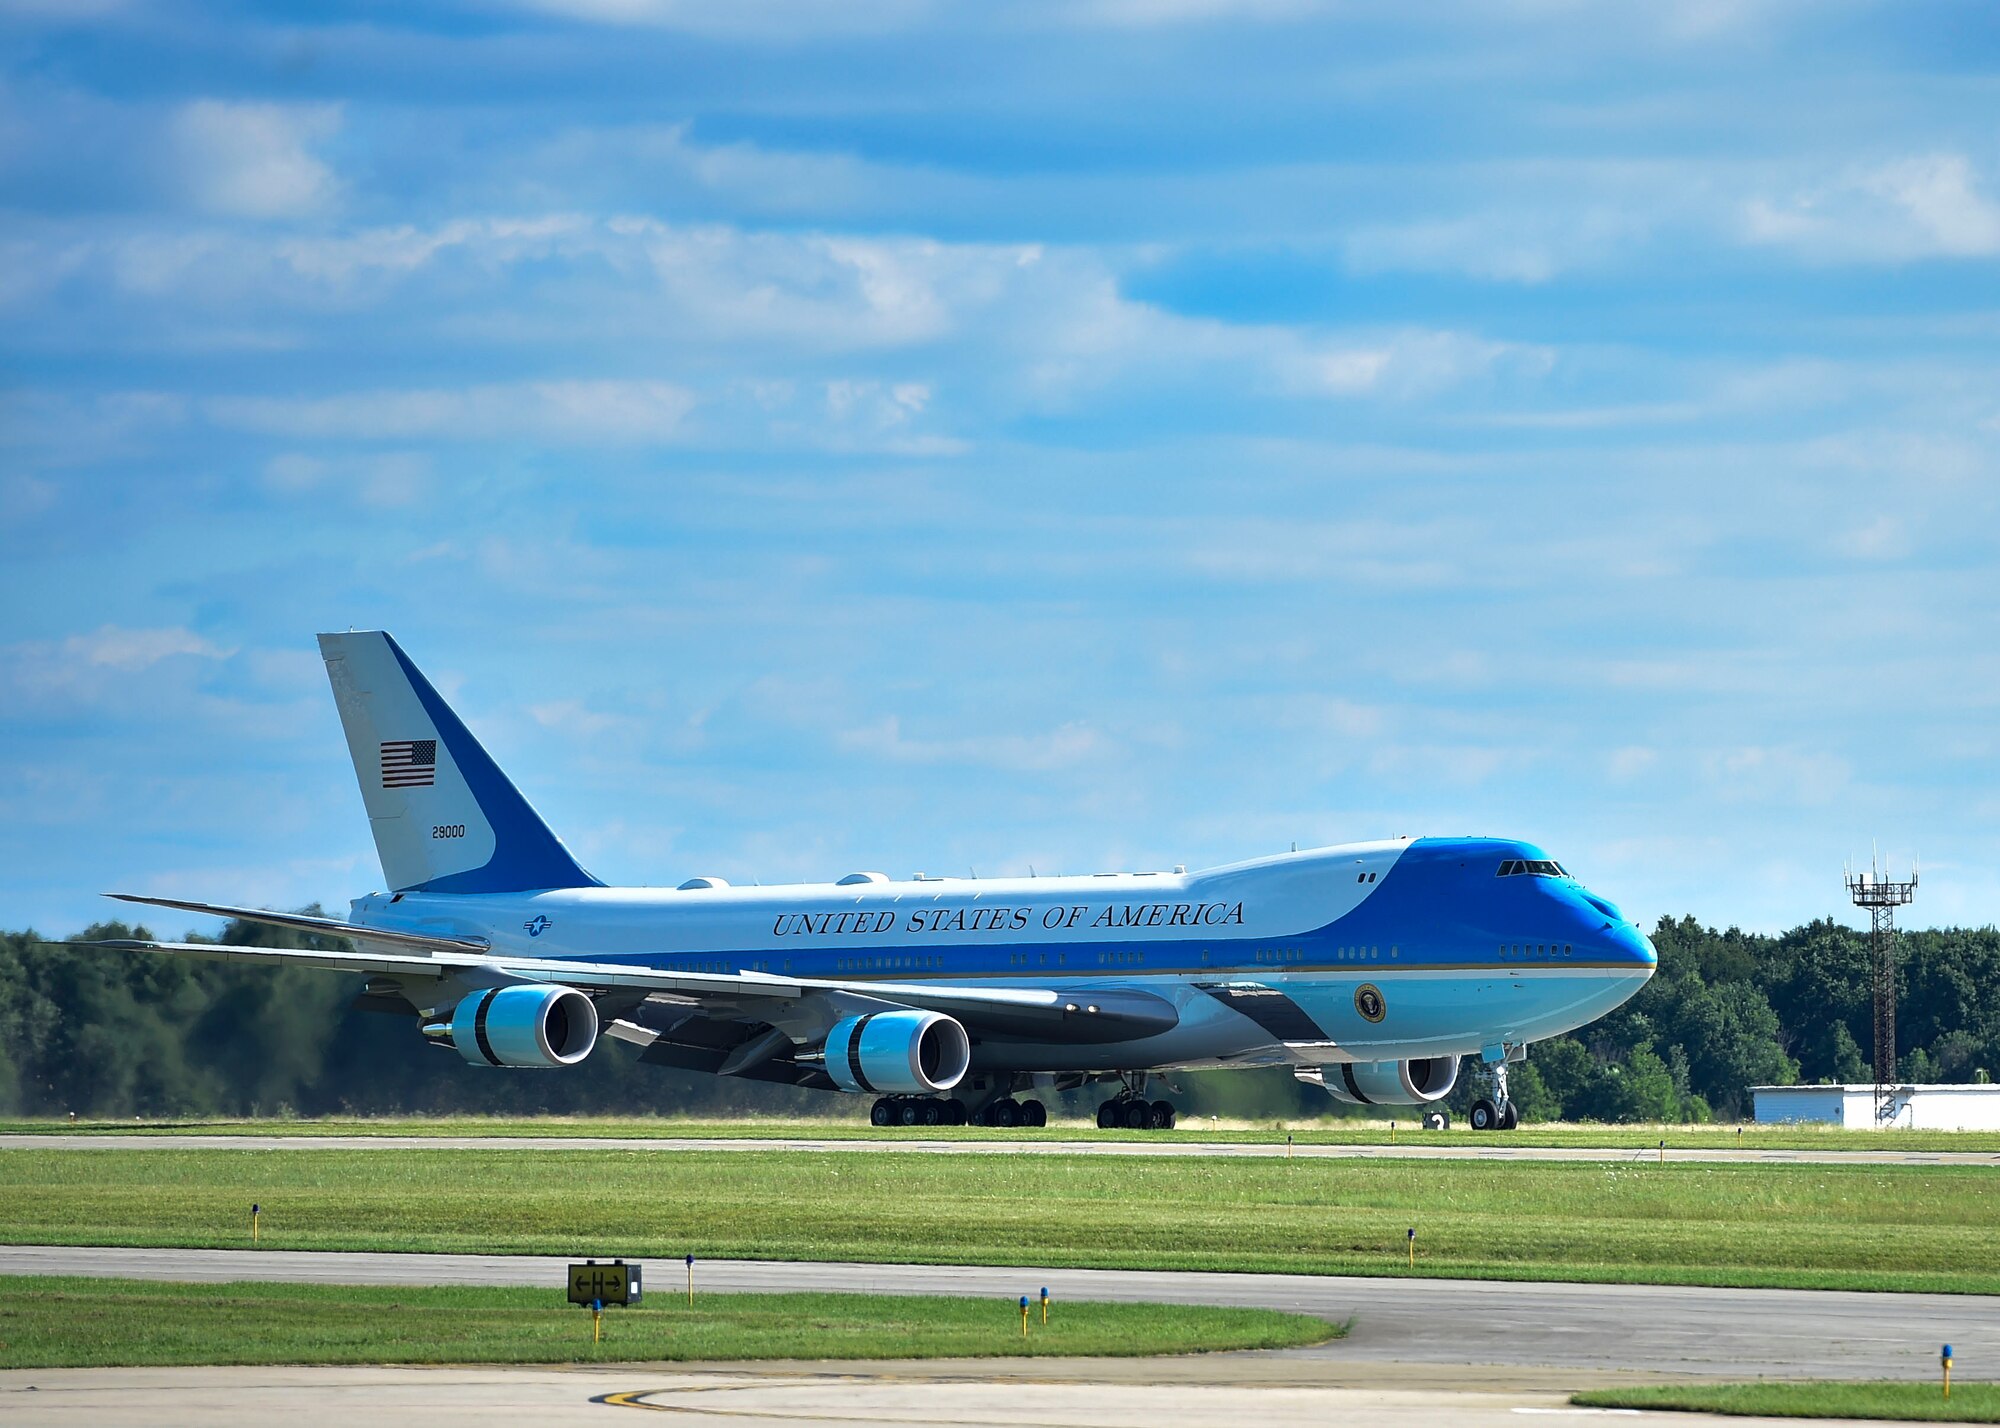 Air Force One lands here, July 25, 2017 with President Donald Trump and First Lady Melania on board. Trump greeted several Service members and guests before departing the station to attend events in and around the Youngstown, Ohio area. (U.S. Air Force photo/Senior Airman Jeffrey Grossi)